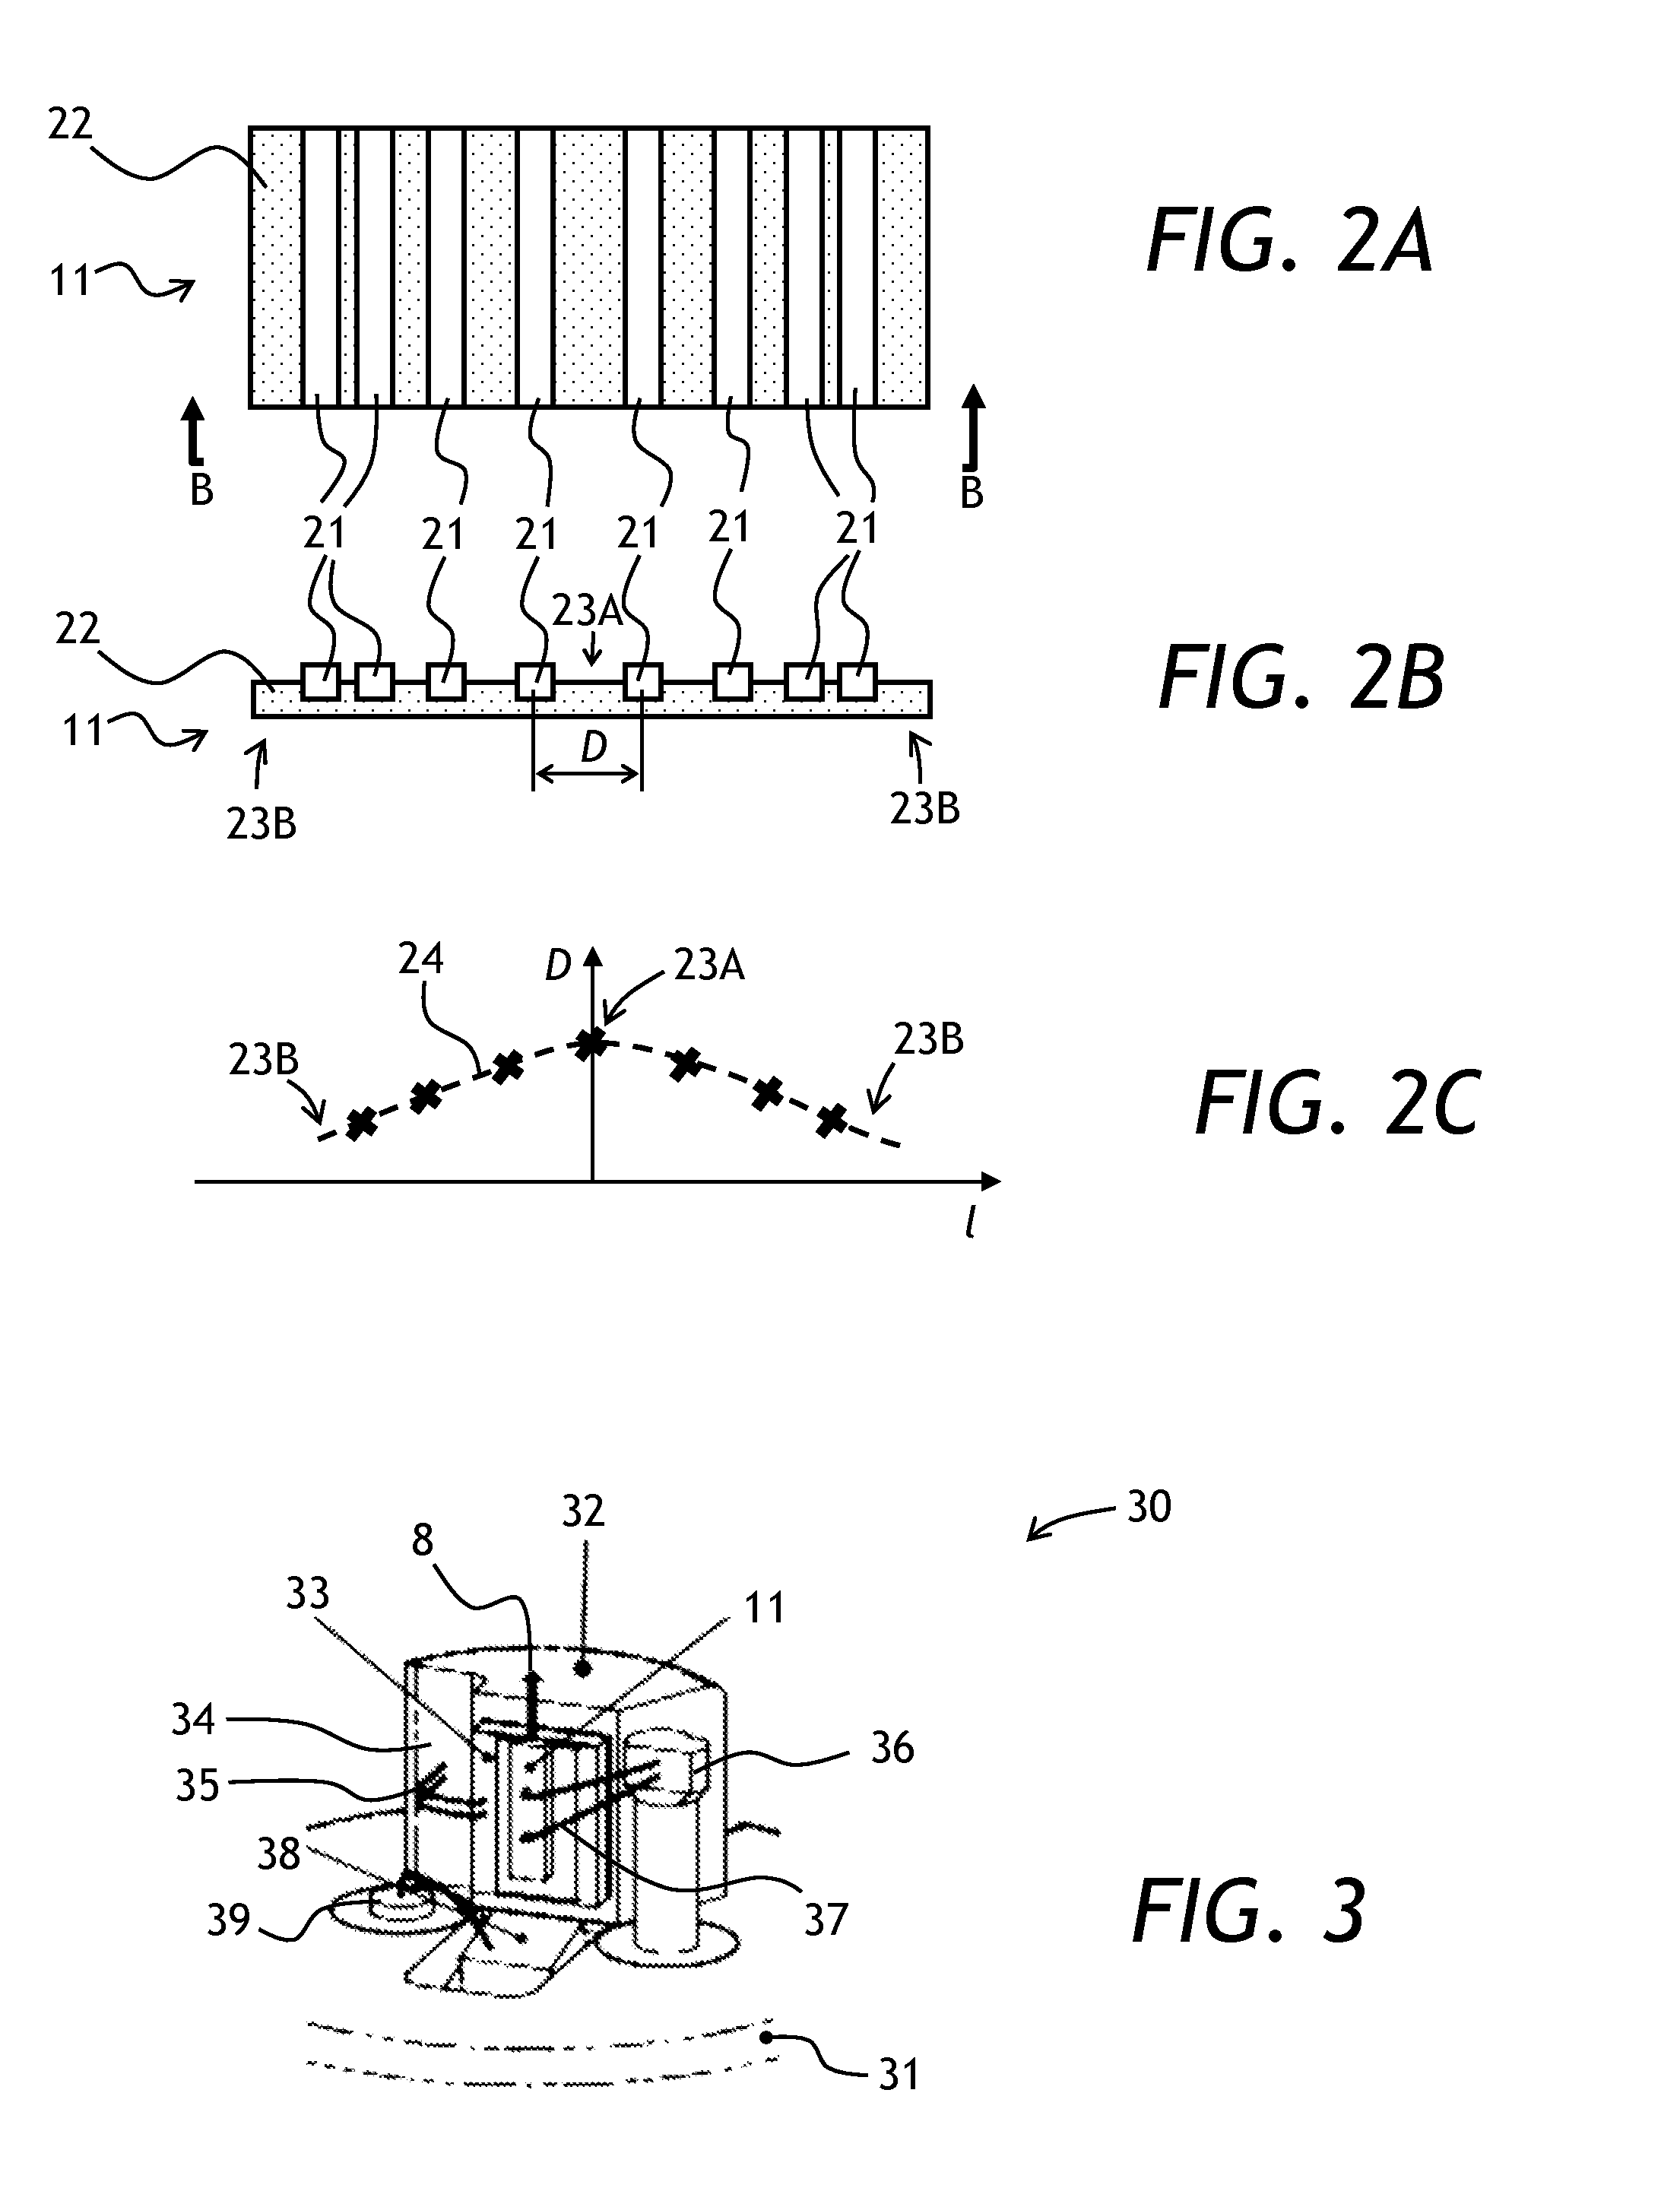 Range imaging devices and methods